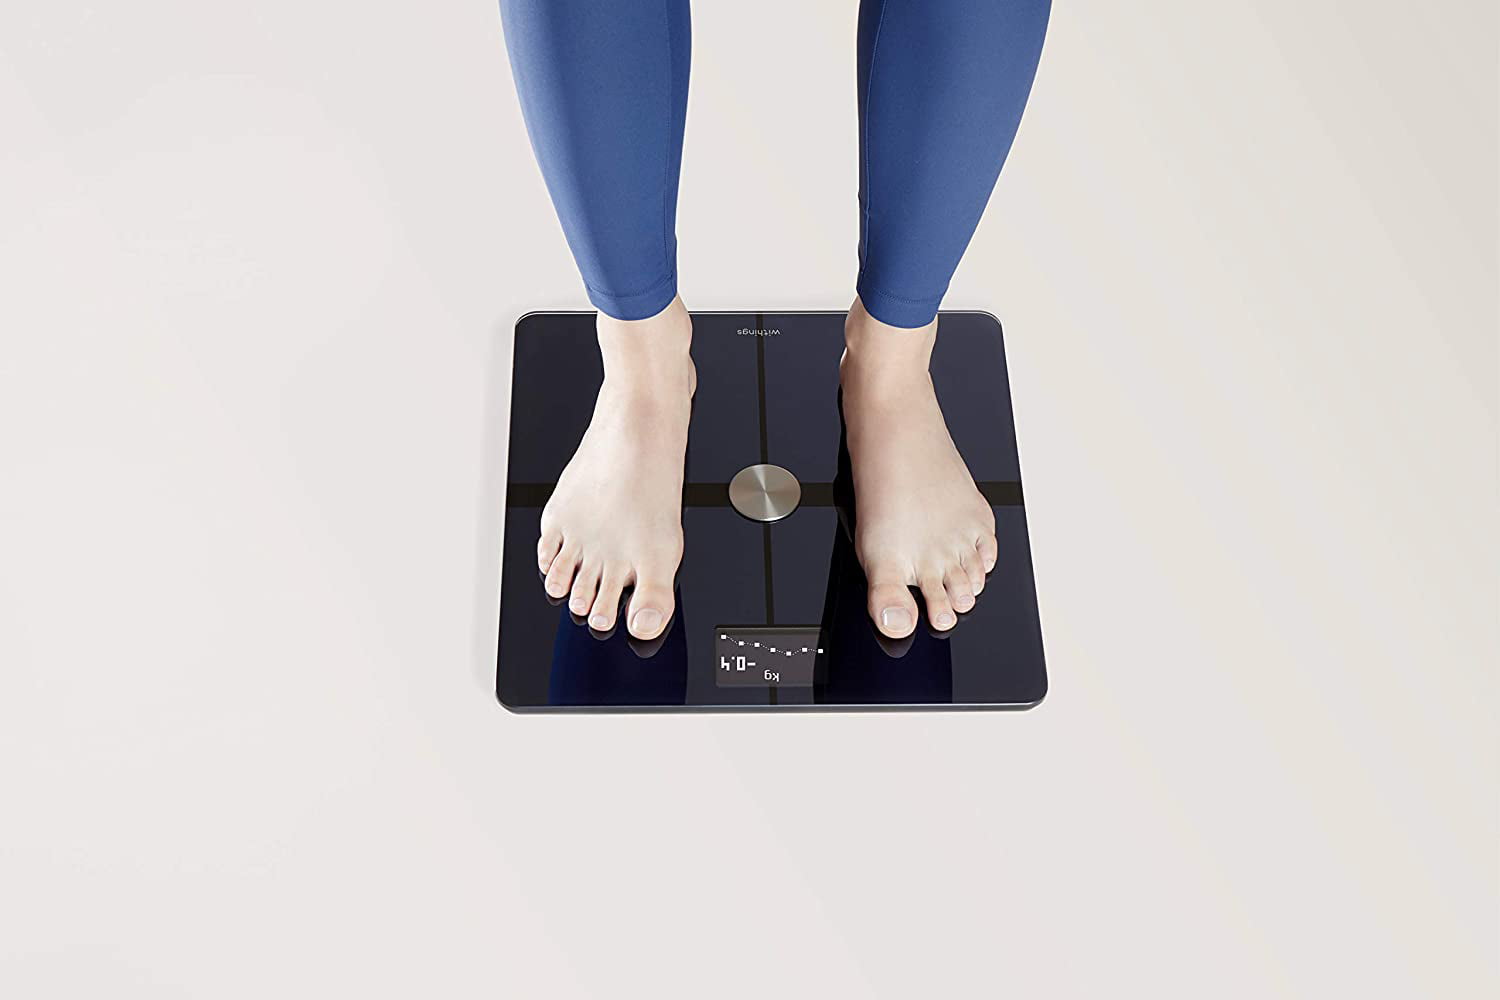 Withings Body+ - Digital Wi-Fi Smart Scale with Automatic Smartphone App  Sync, Full Body Composition Including, Body Fat, BMI, Water Percentage